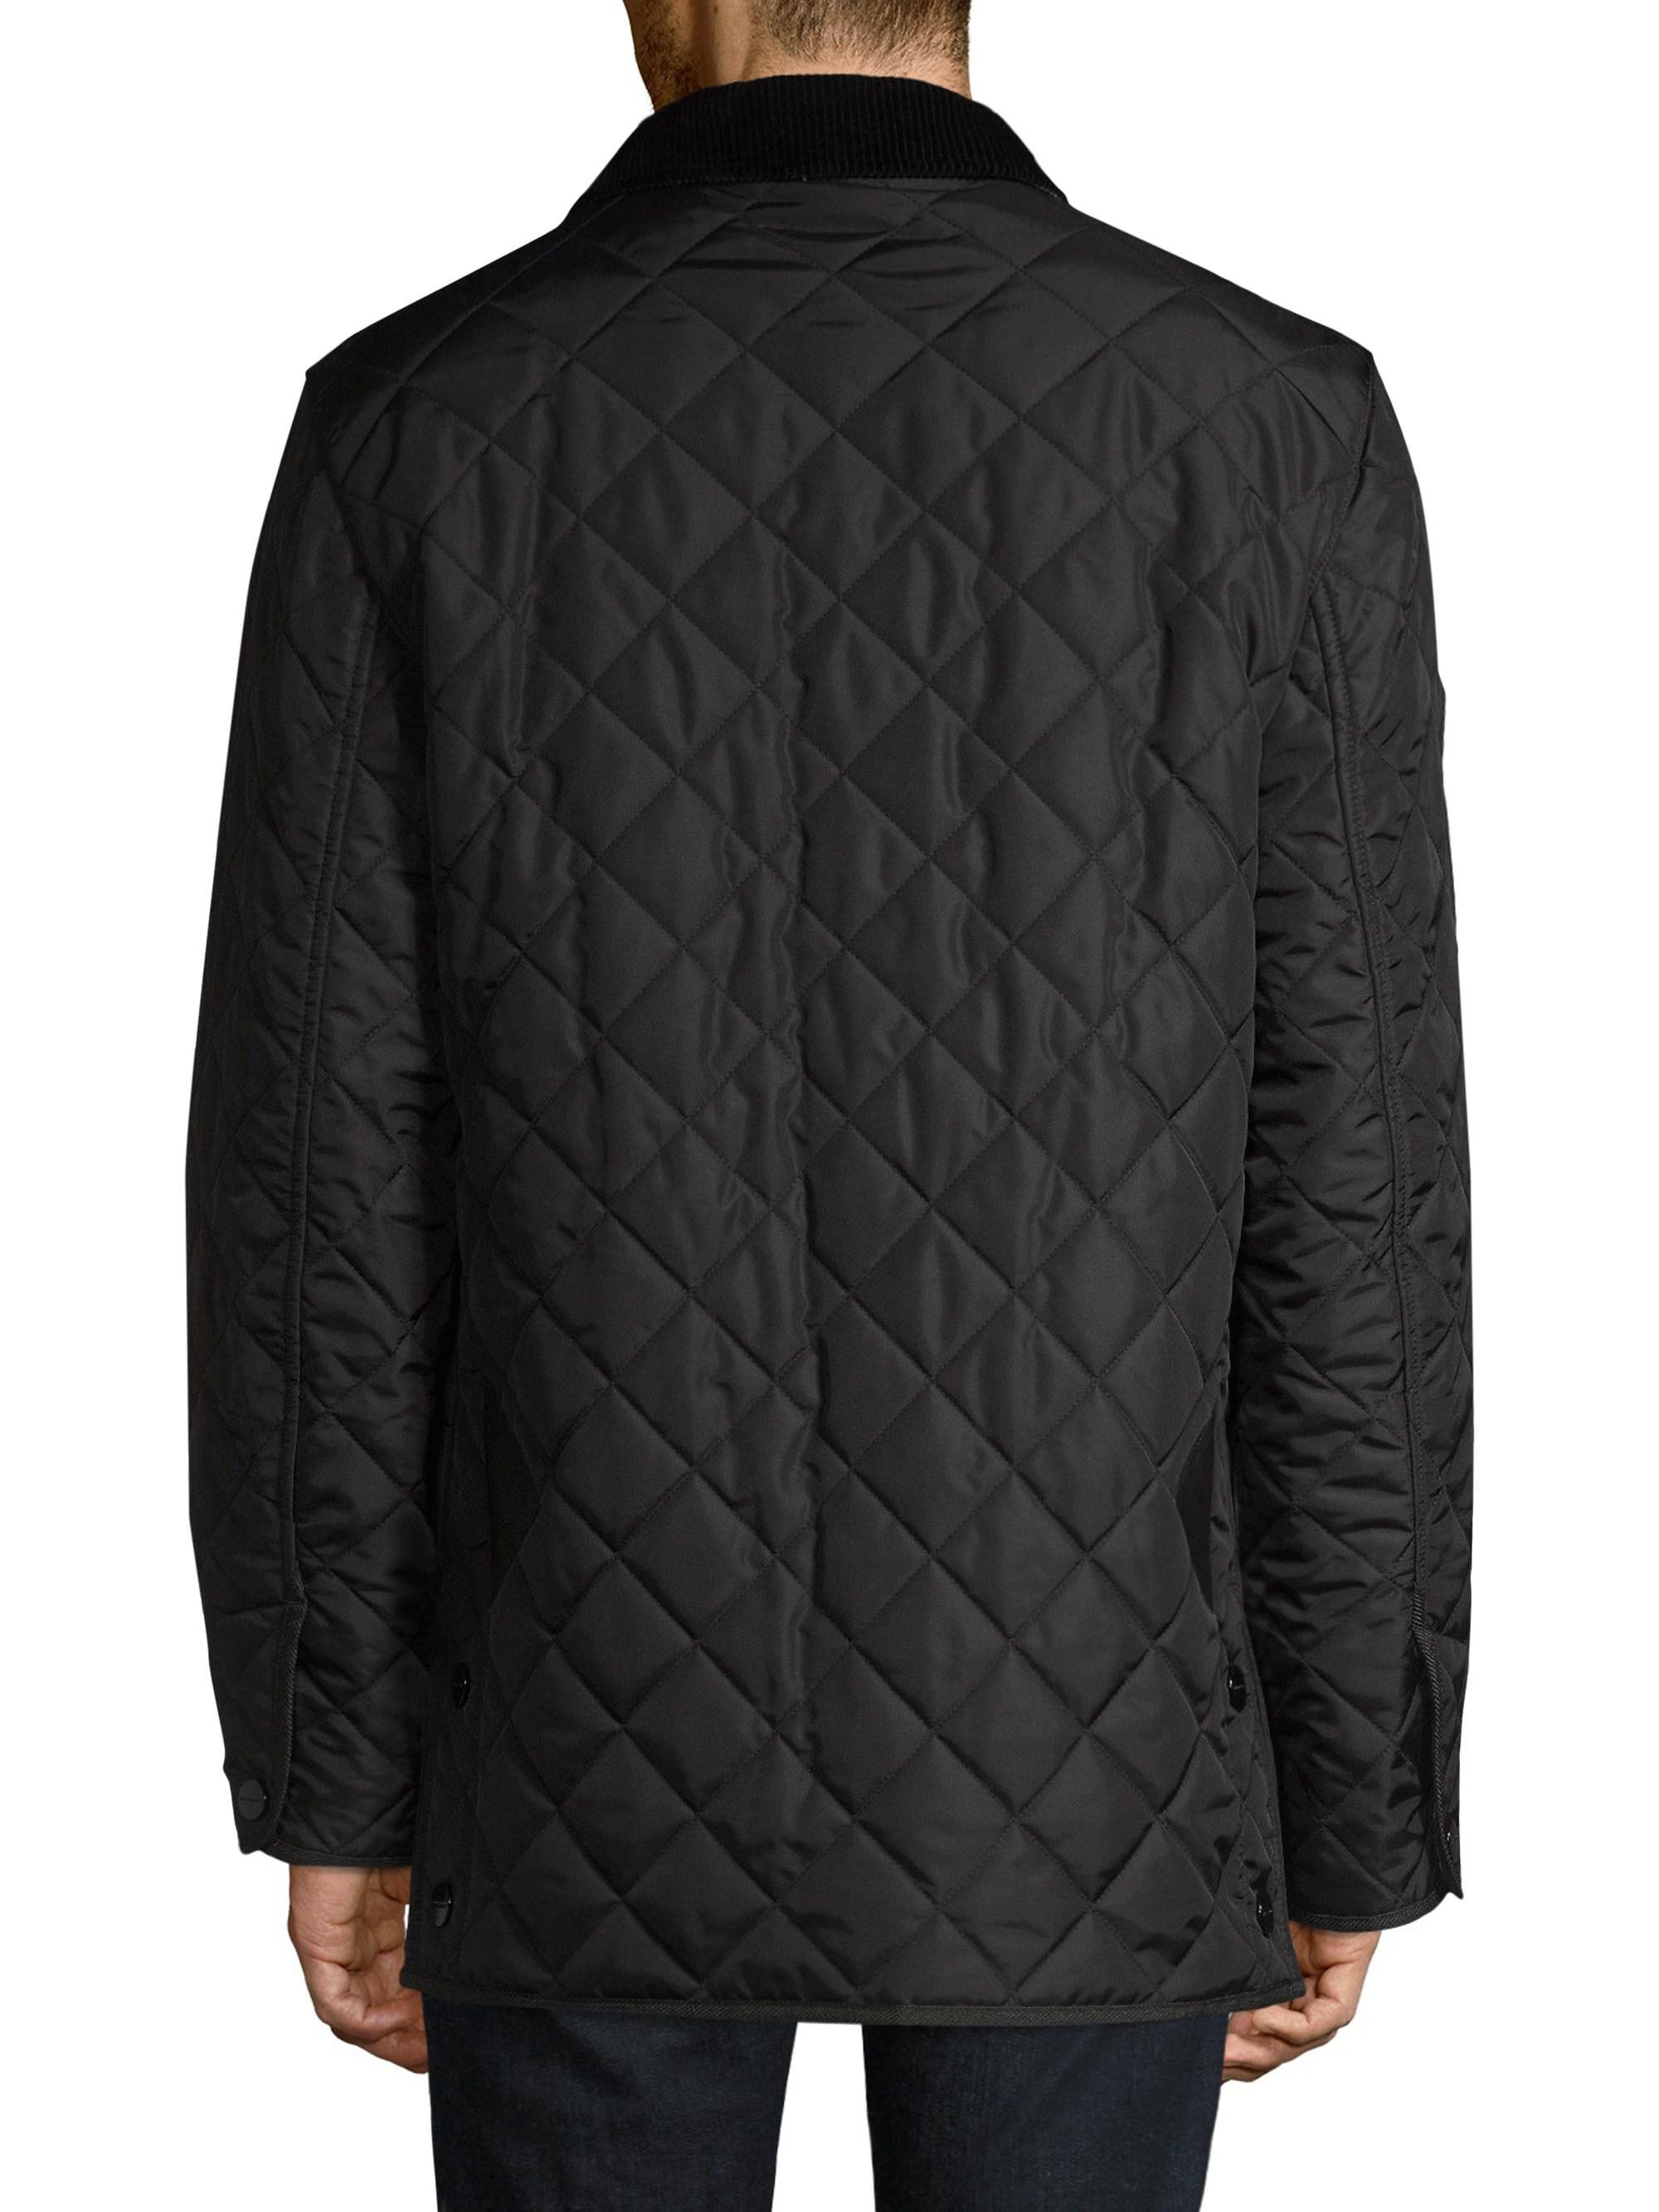 Burberry Cotswold Quilted Barn Jacket in Black for Men - Lyst